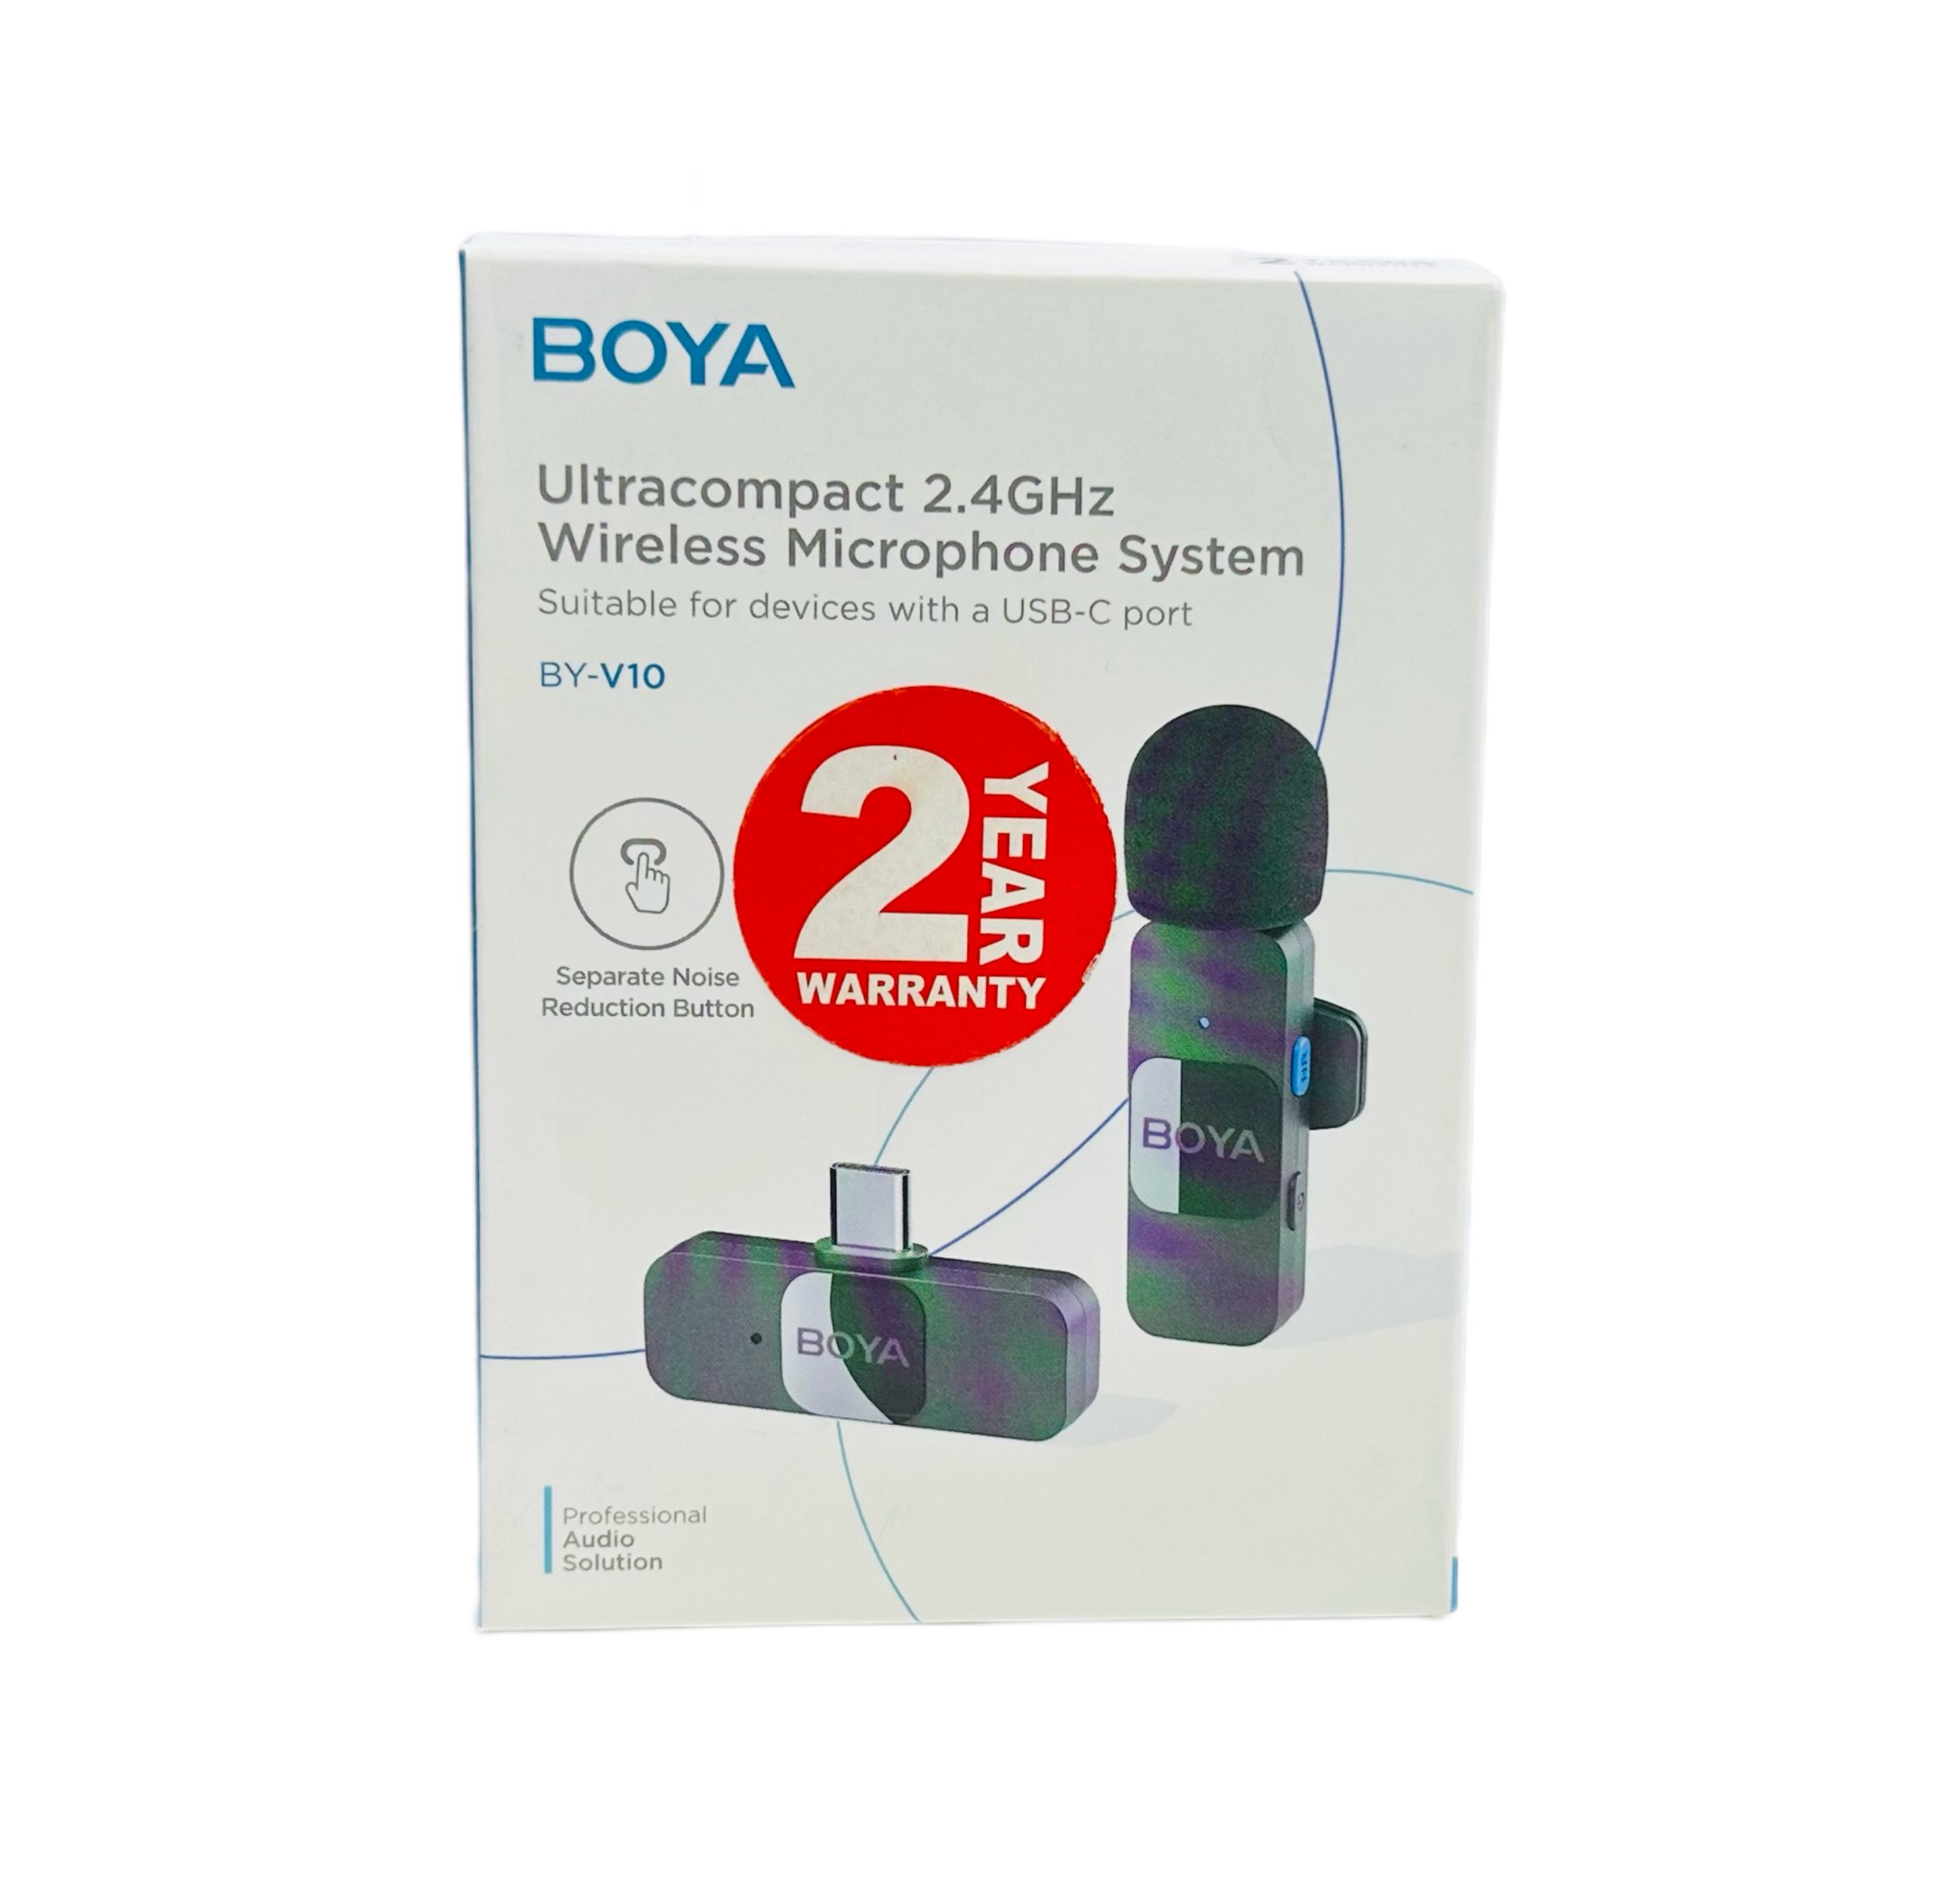 BOYA BY-V10 Ultracompact 2.4GHz Wireless Microphone for Type-C 01